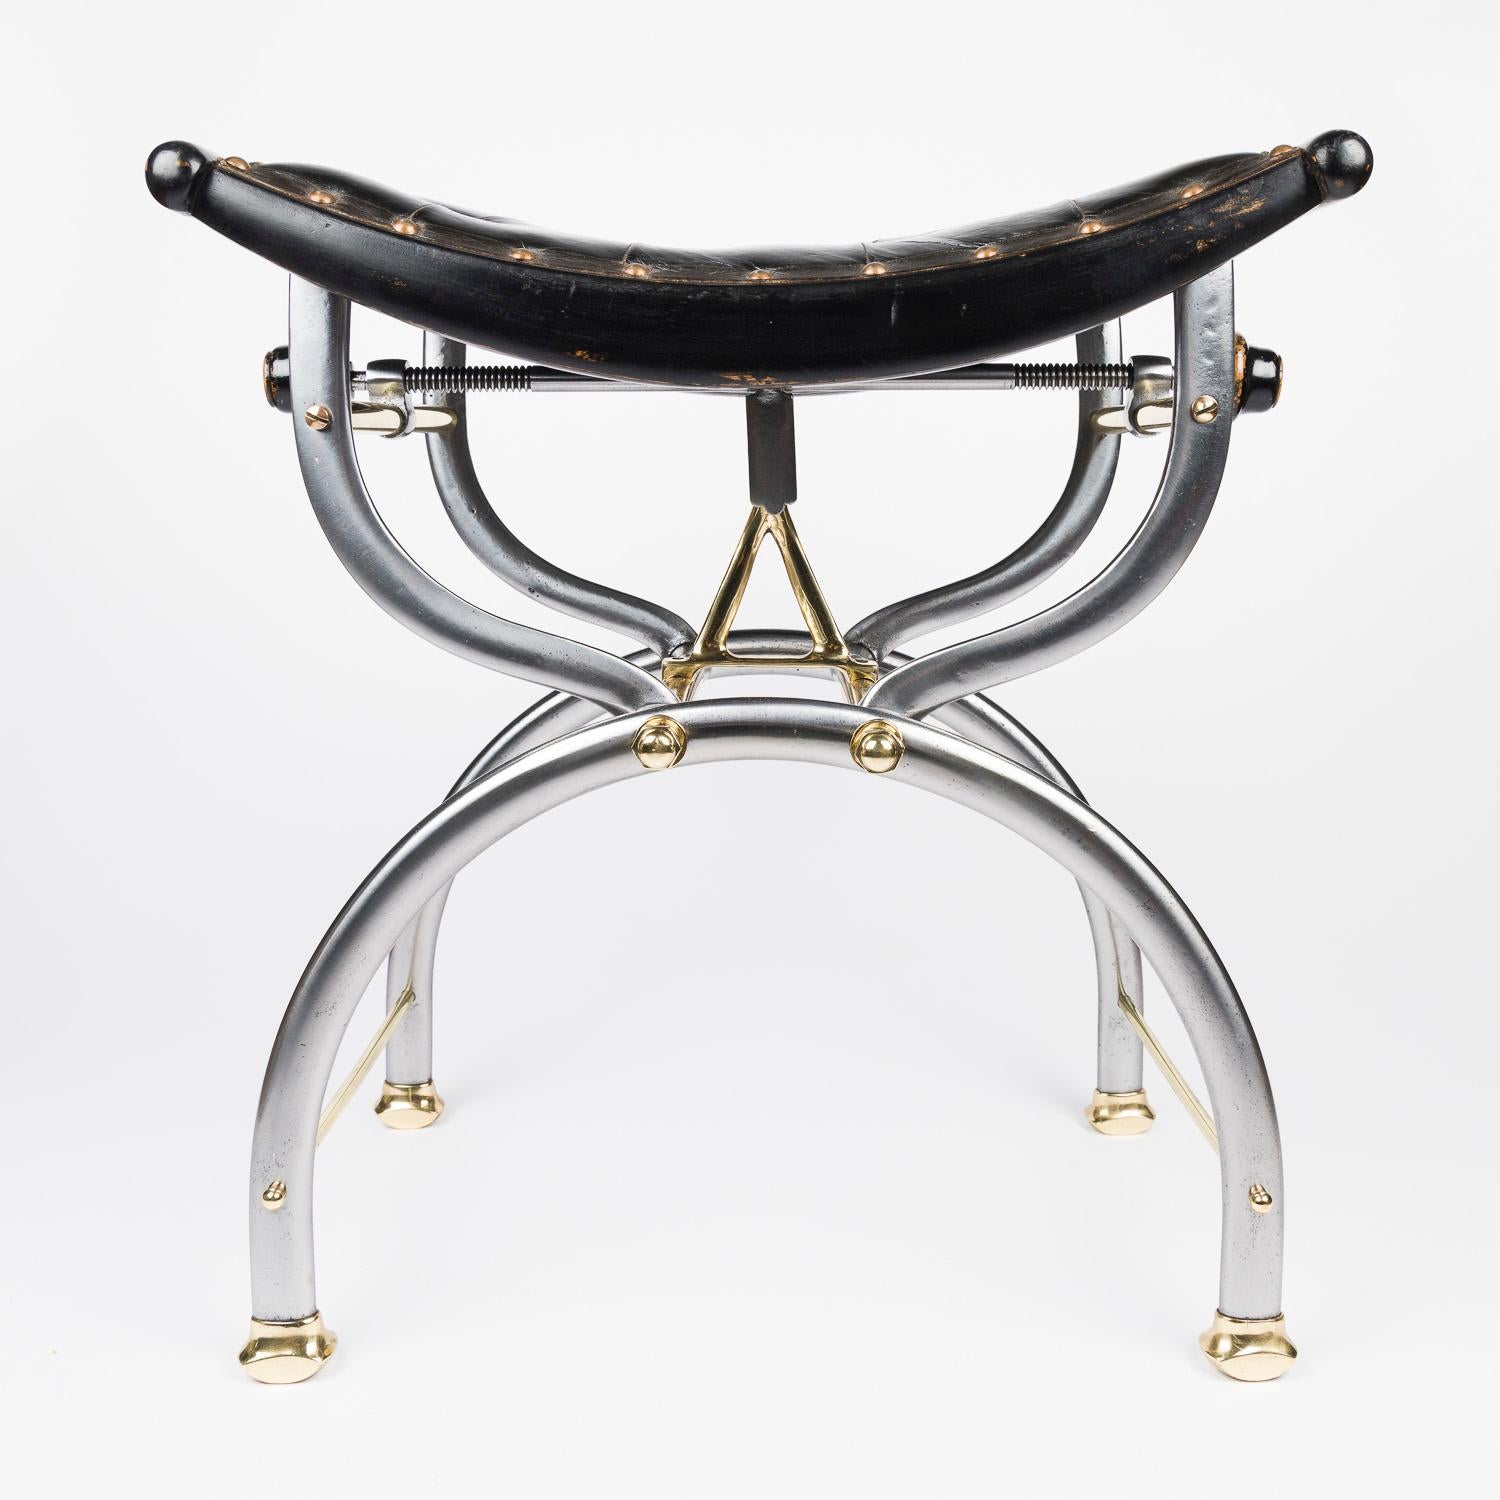 Stool of adjustable height by C. H. Hare and Sons In Good Condition For Sale In London, GB